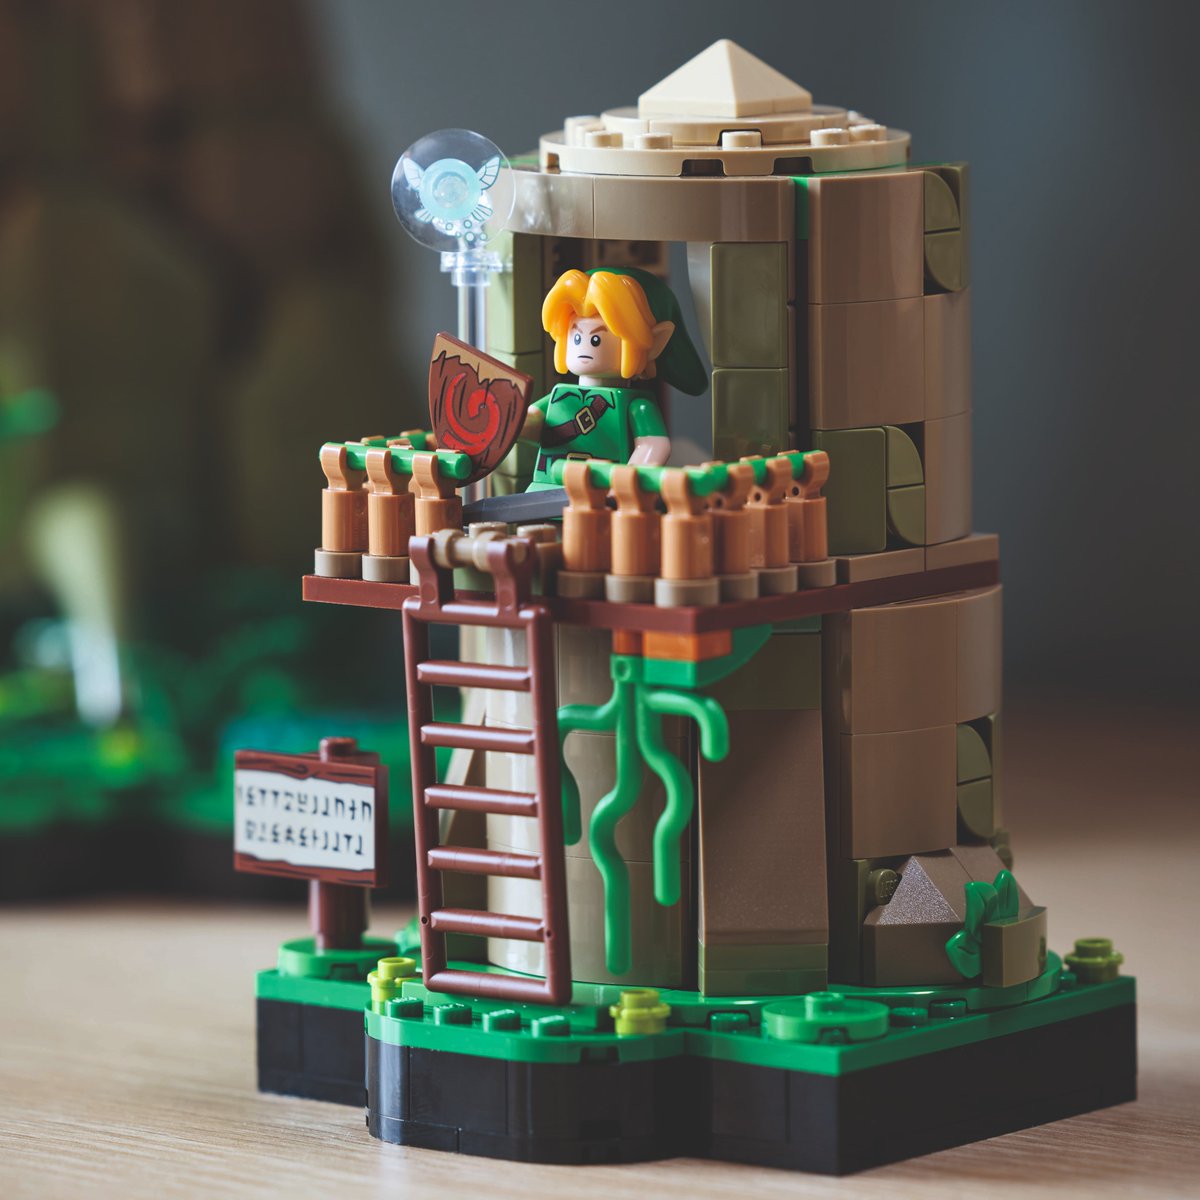 Announcing the LEGO Legend of Zelda Great Deku Tree 2-in-1 set! – 2,500 Pieces – $299.99 / €299.99 / £259.99 – Pre-order May 28 / Available September 1 What do you think?